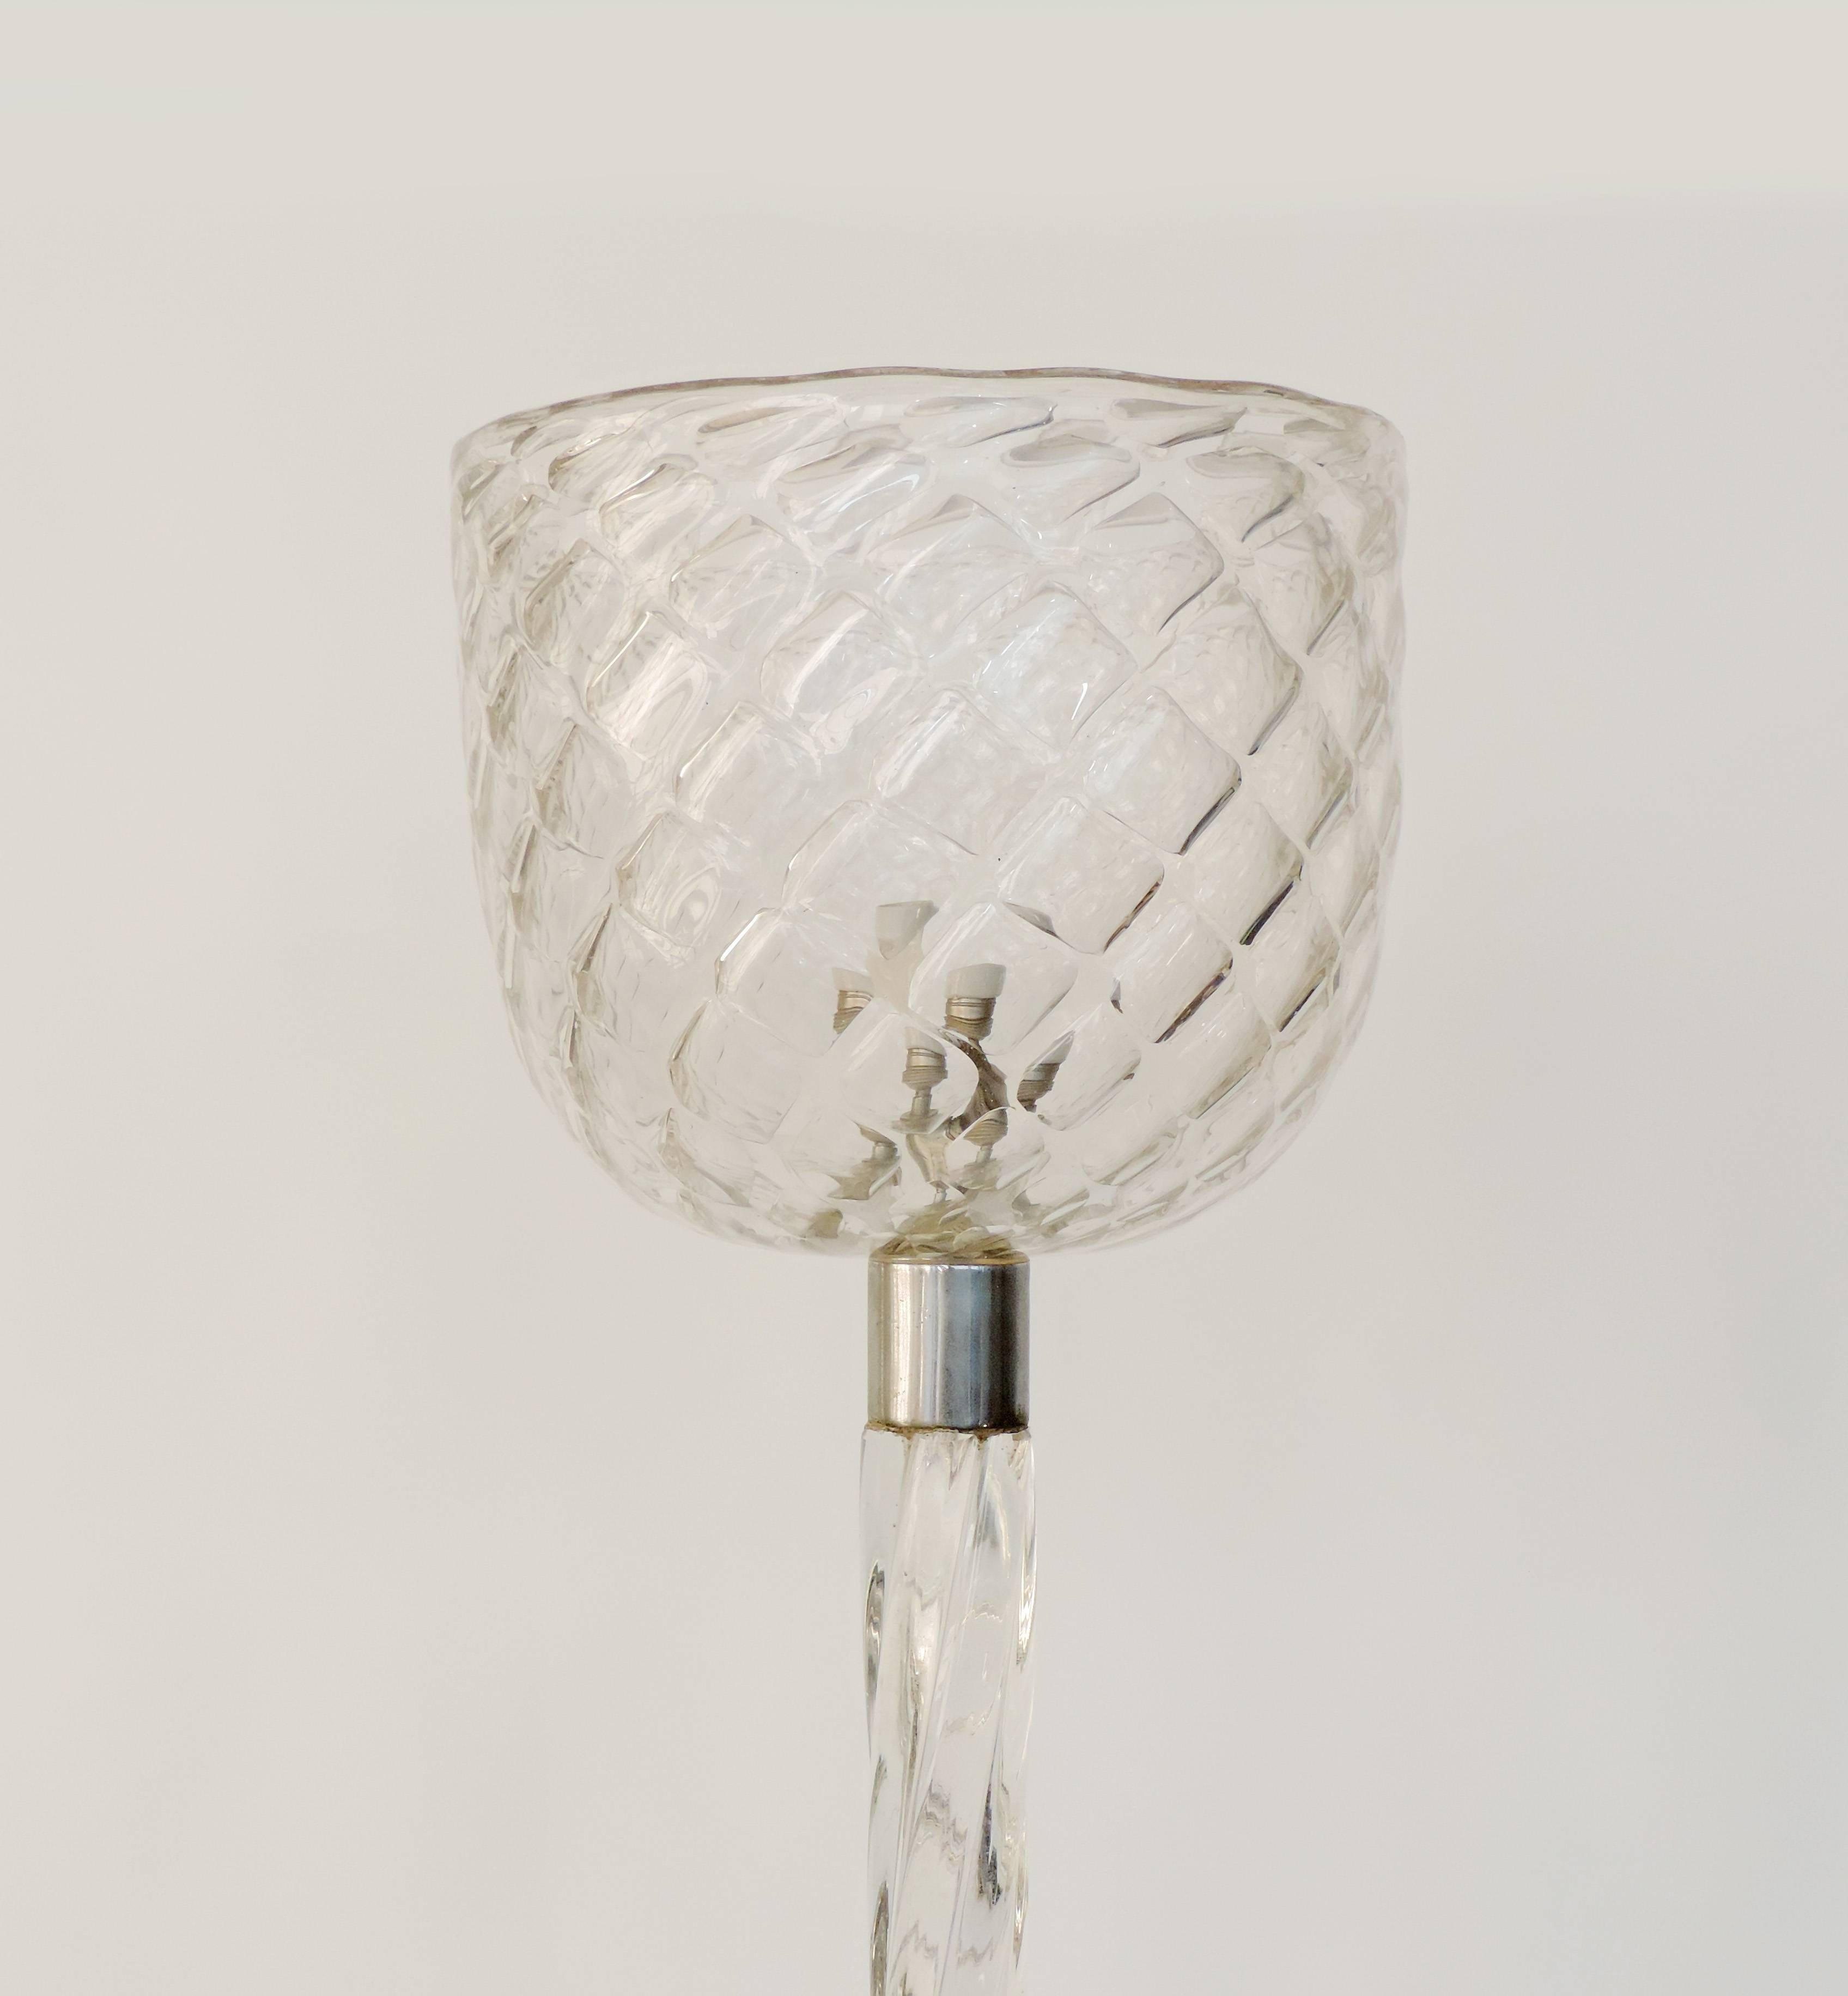 Spectacular Murano, 1930s floor lamp.
Attributed to Gio Ponti.